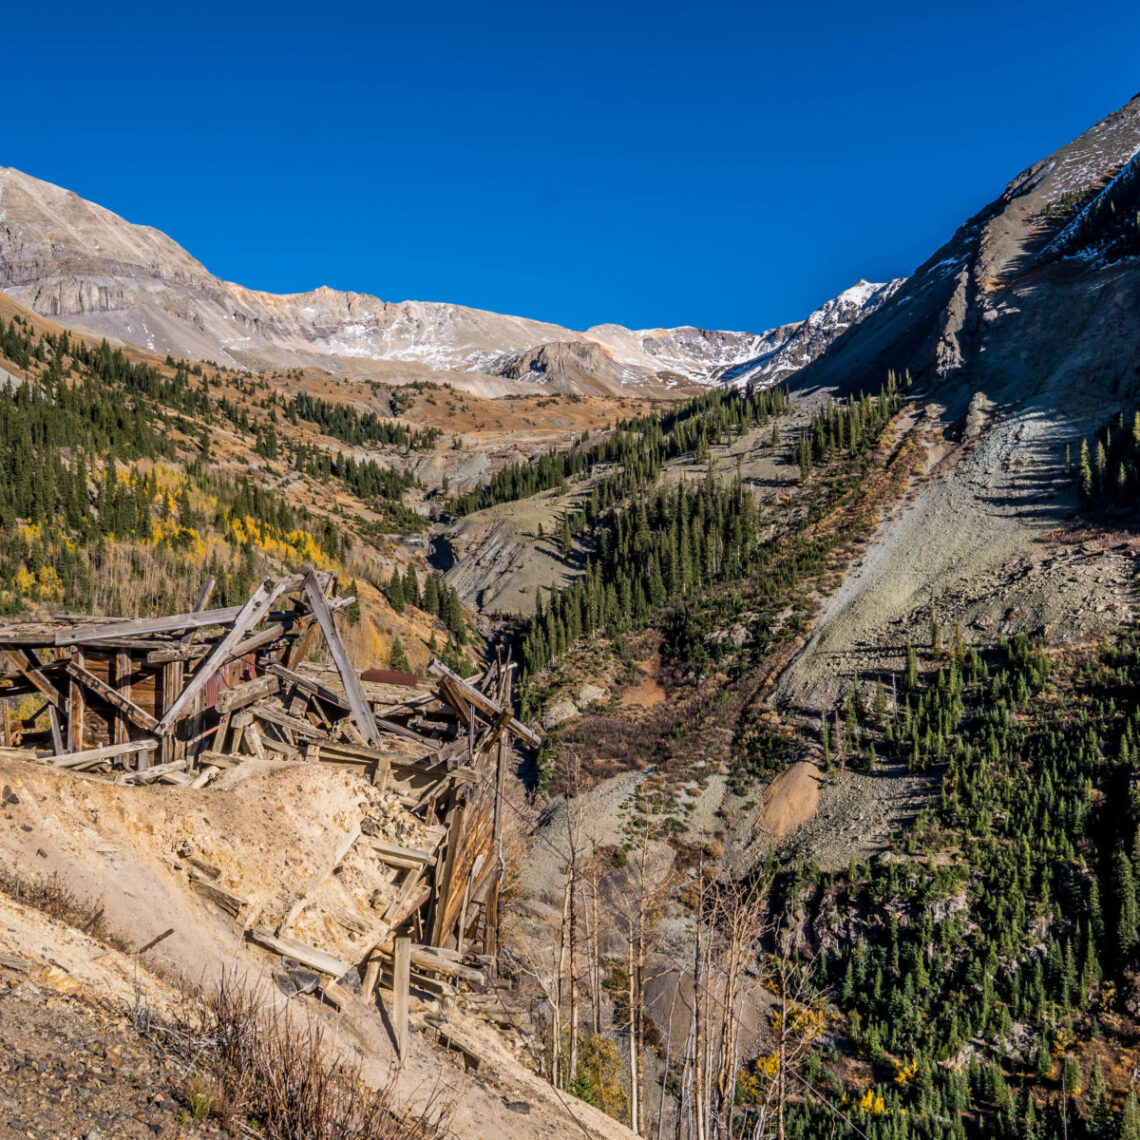 Remains of the Tomboy Smuggler-Union Mine Complex at the Bullion Tunnel on the north side of the Telluride Valley